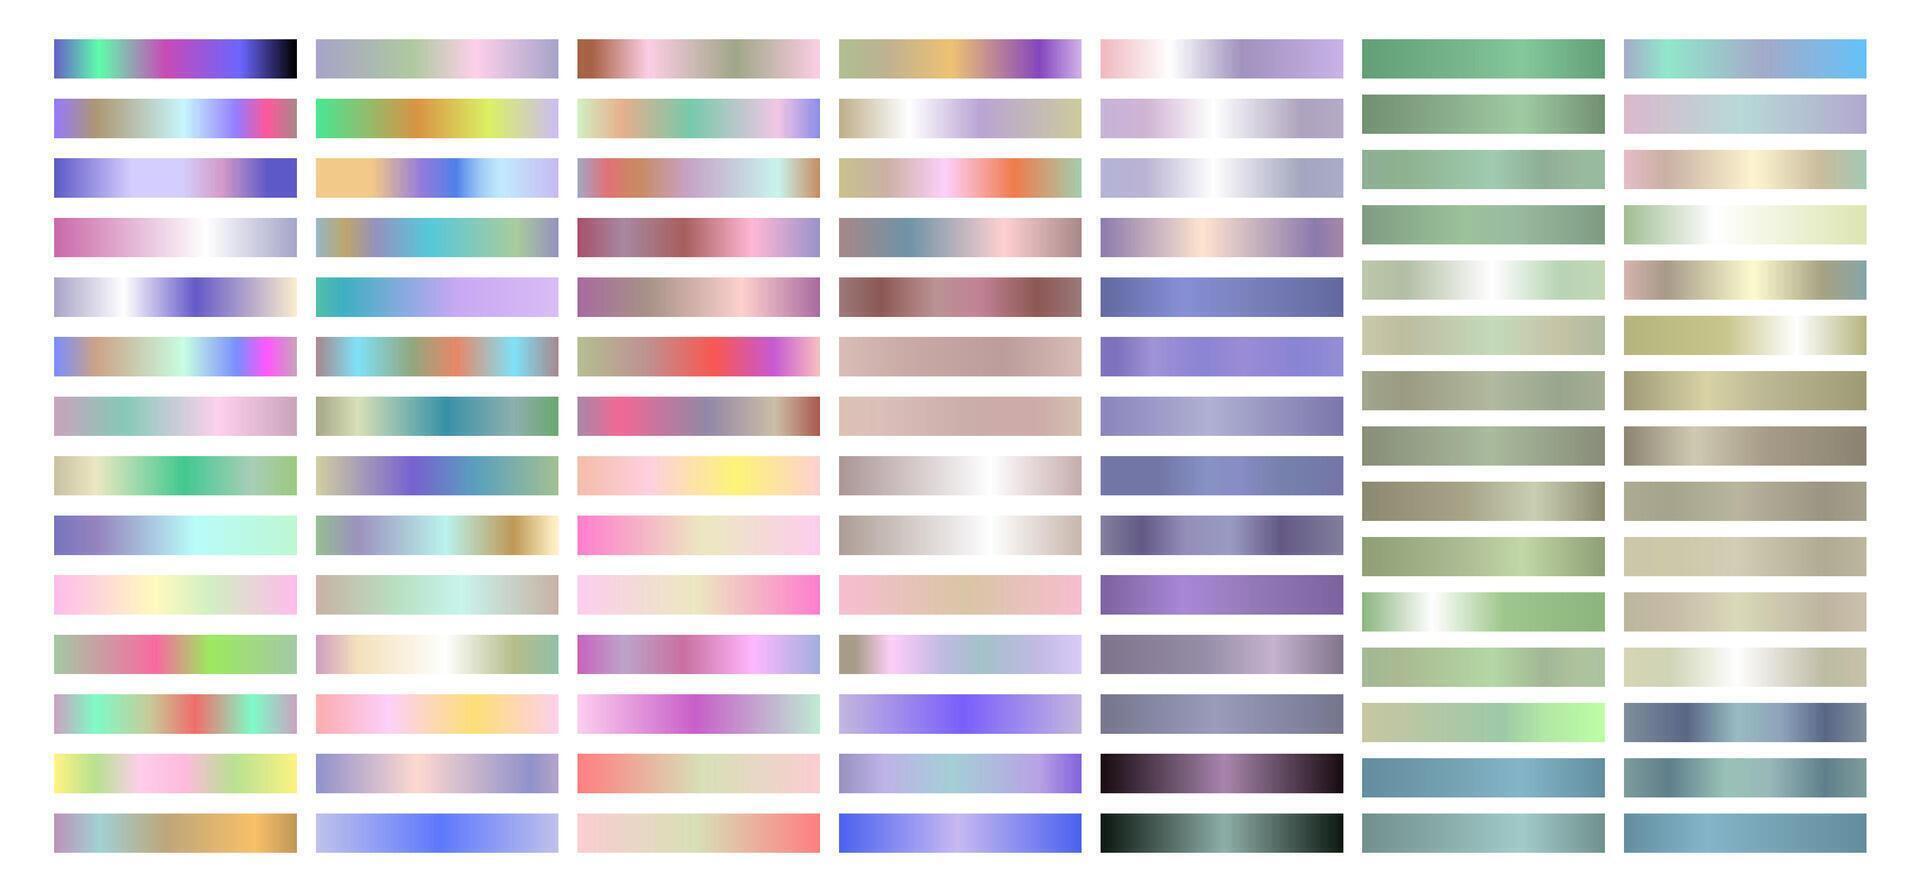 Light Colorful Metal Gradient Collection of Every Color Swatches vector